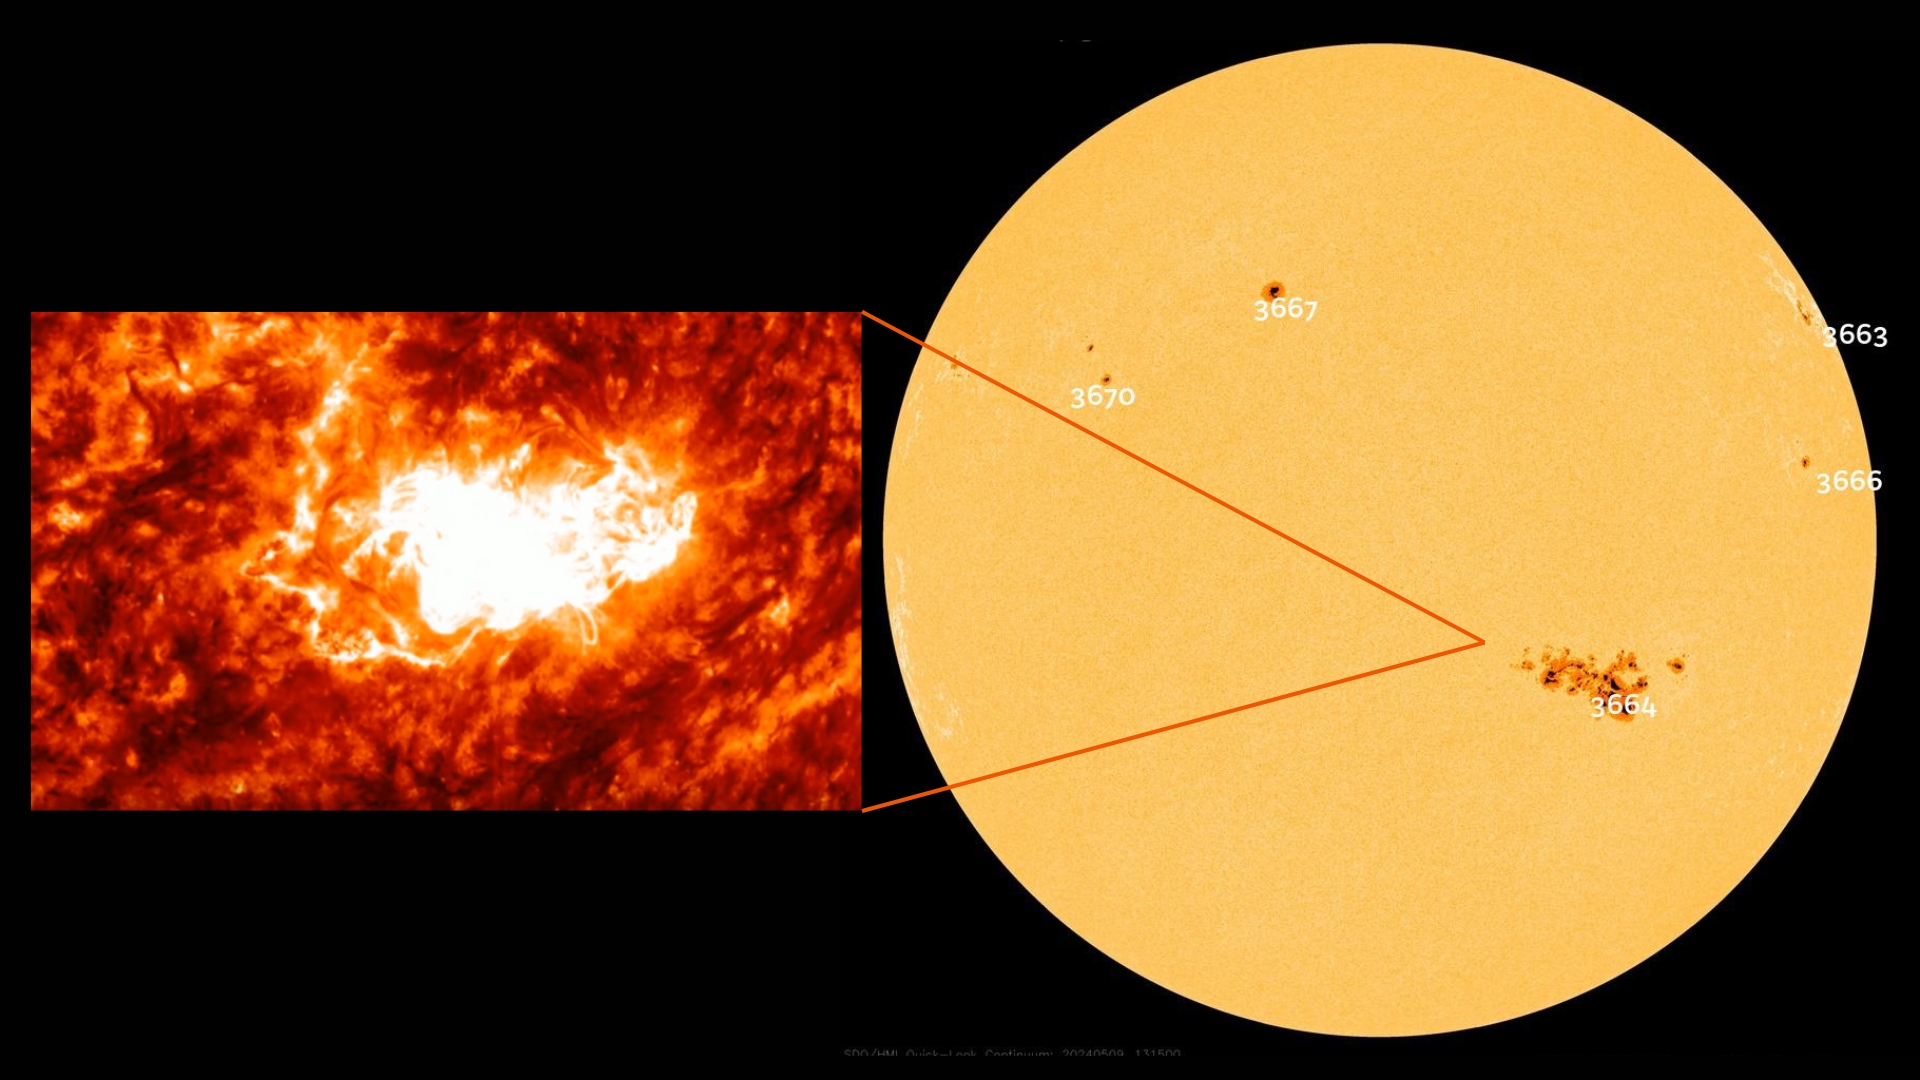 graphic showing the huge sunspot on the surface of the sun with an inset image to the left showing the solar flare.